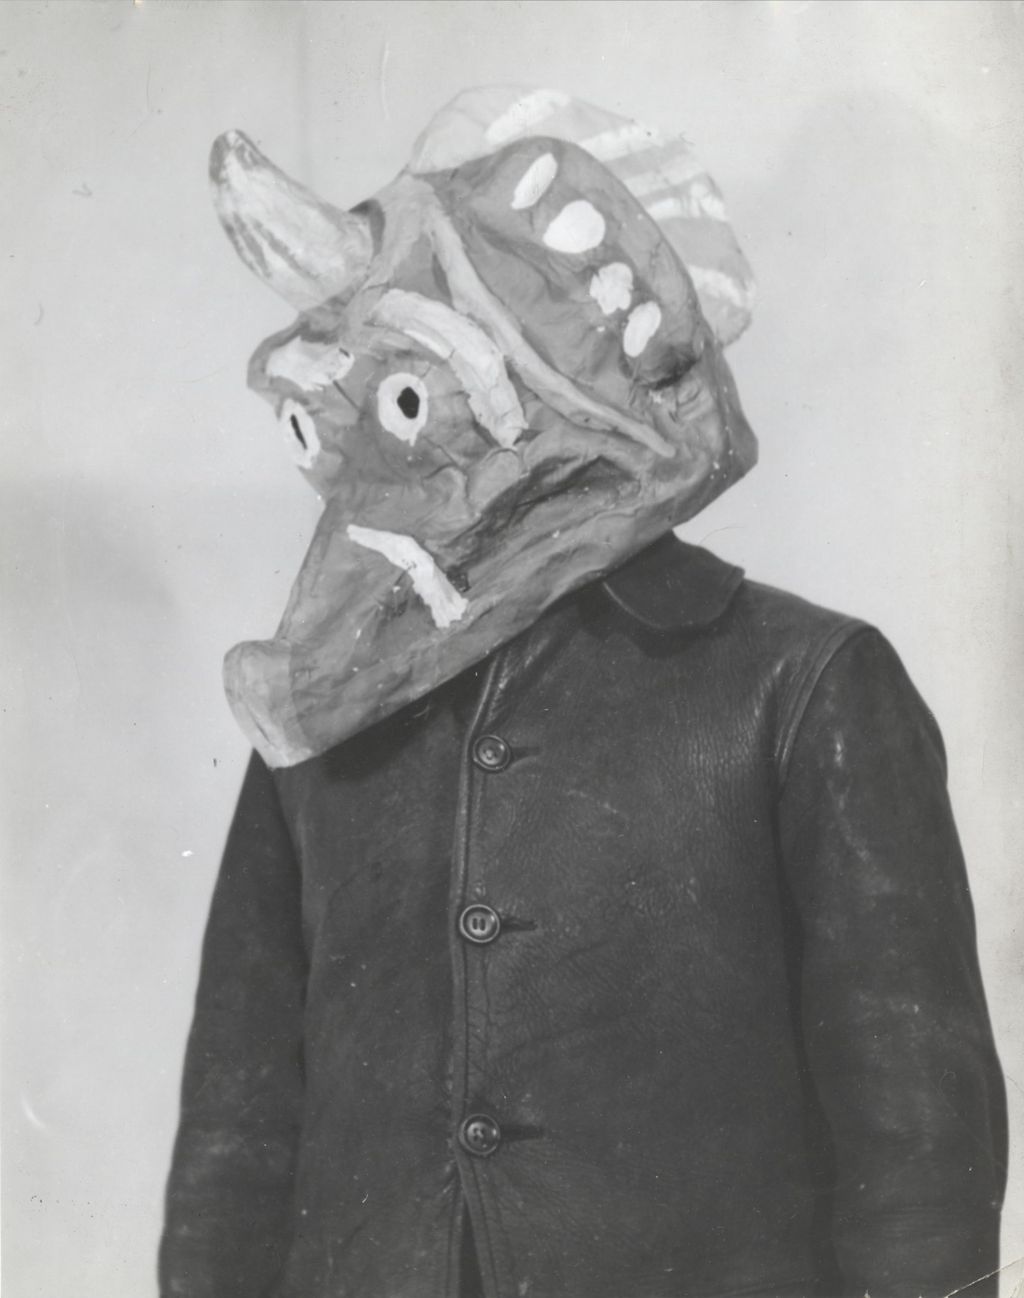 Person wearing papier-mache animal mask created for Hull-House 50th Anniversary circus